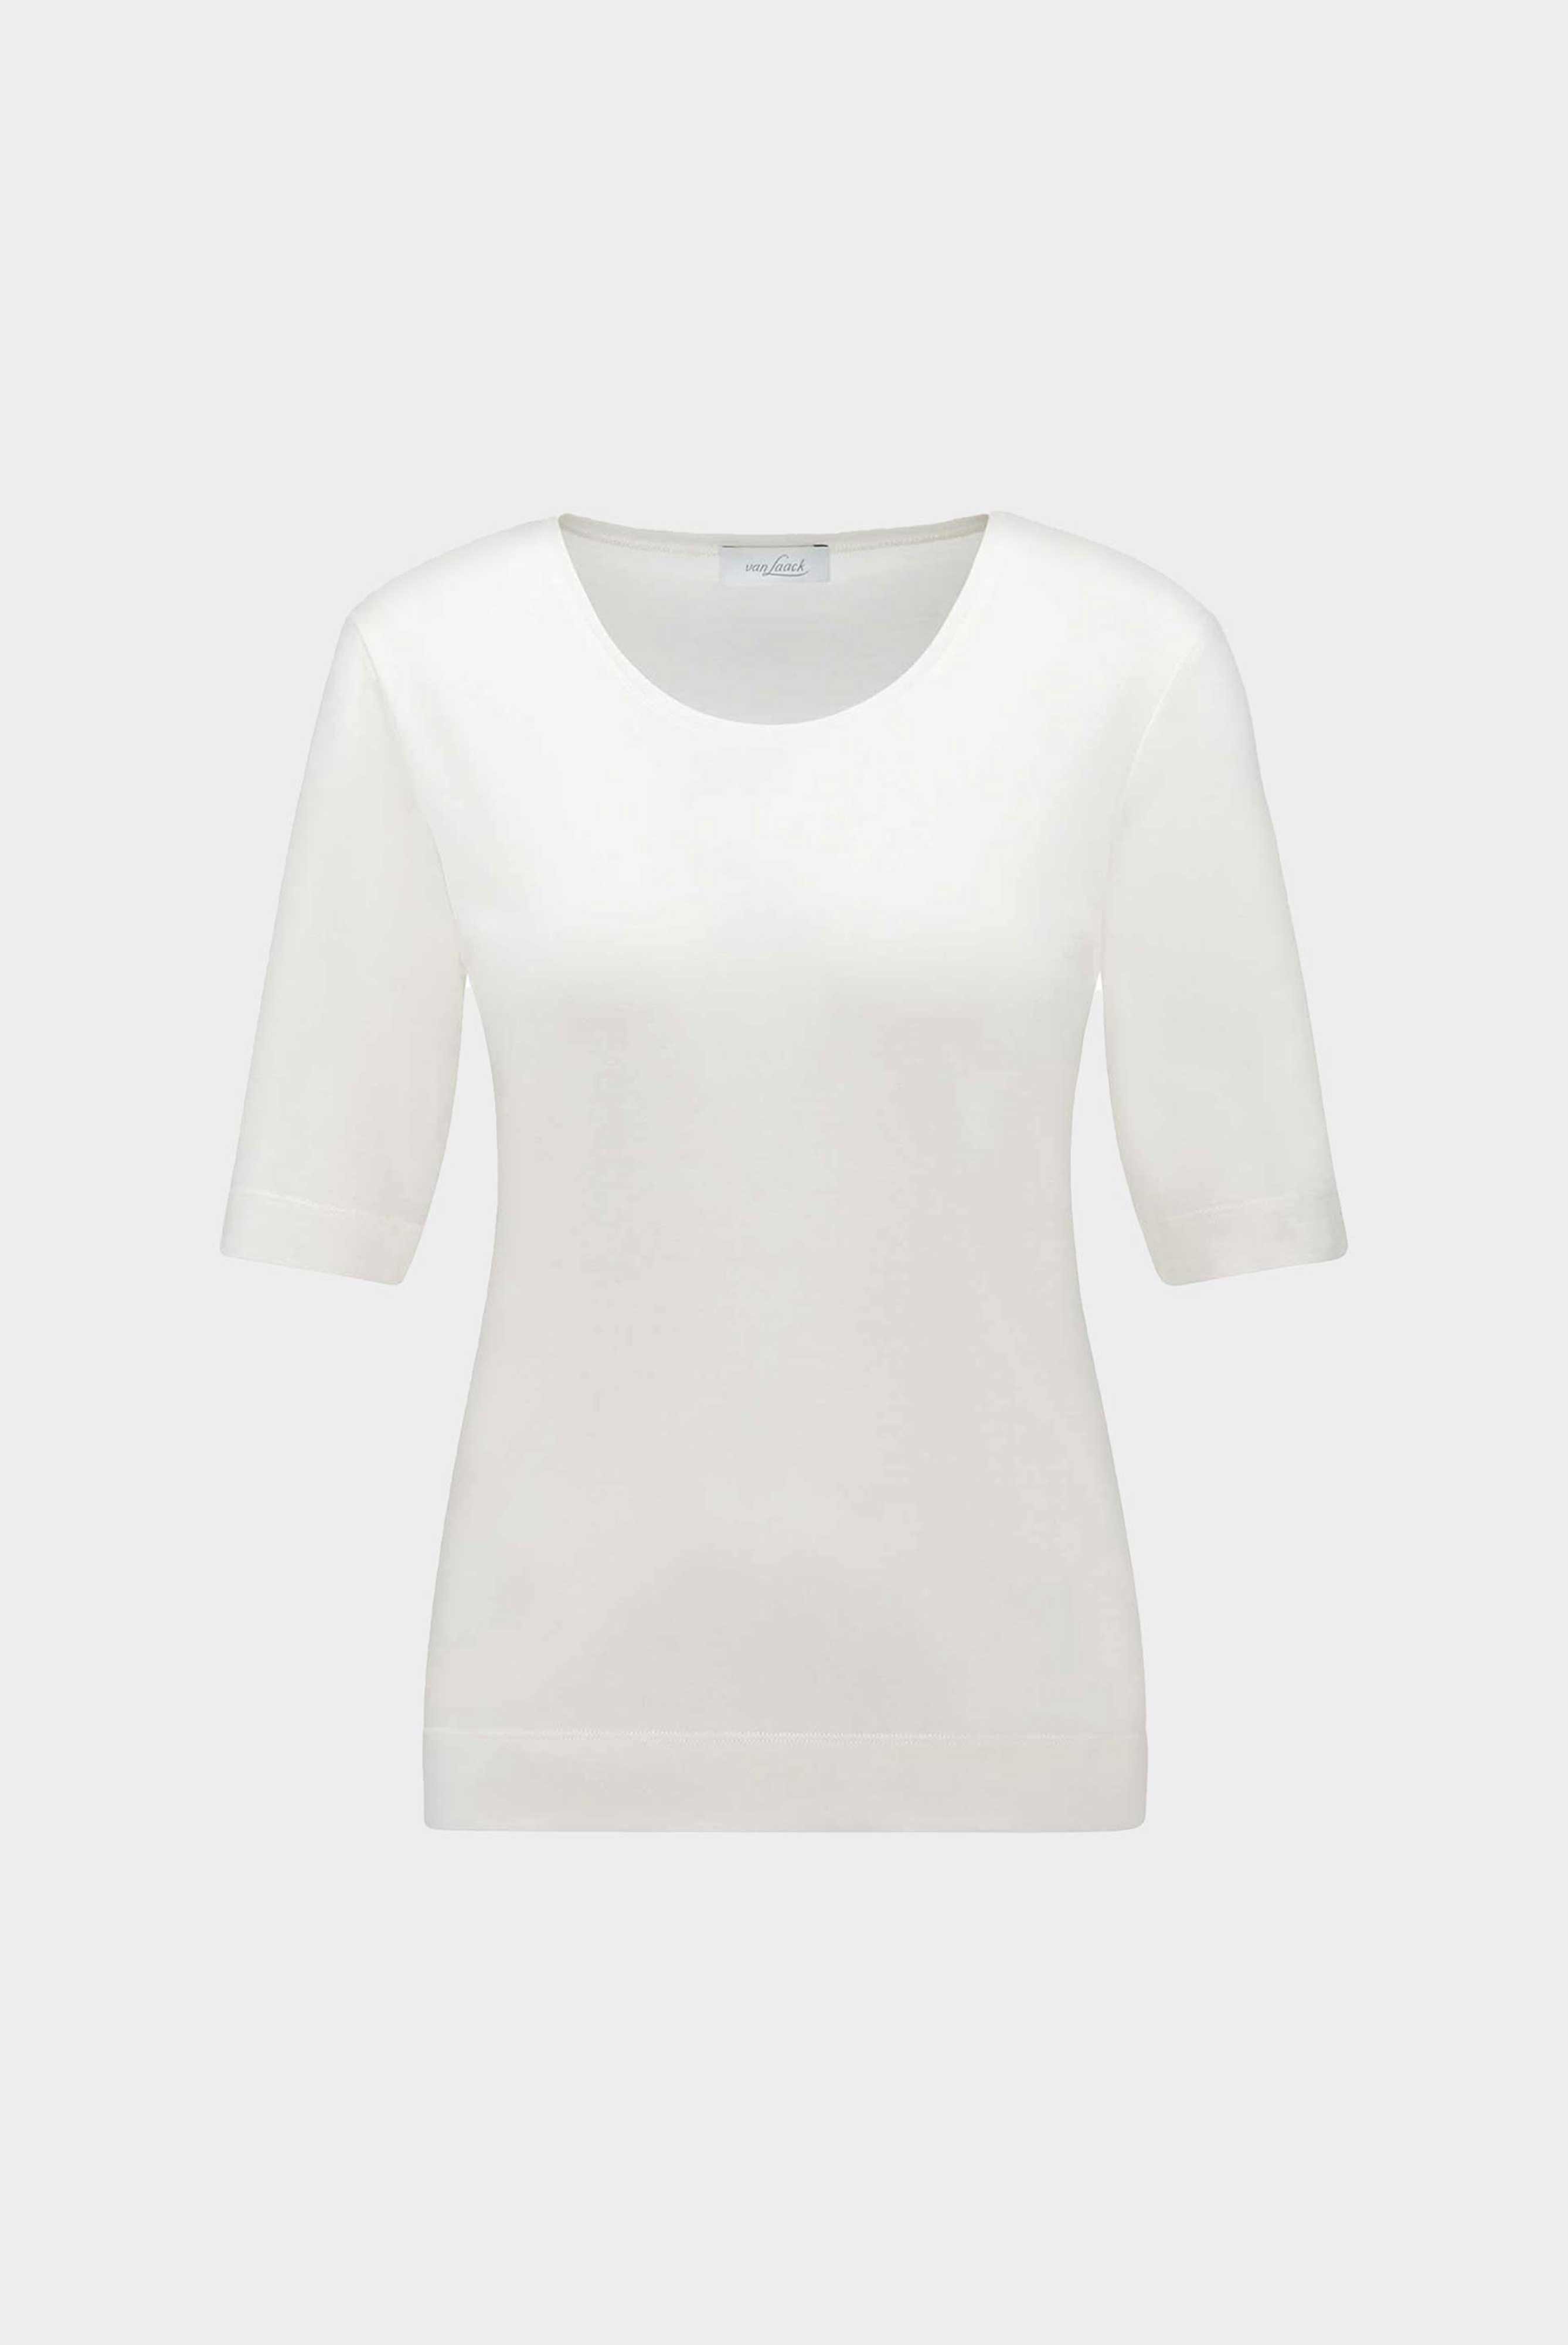 Tops & T-Shirts+Roundneck T-shirt with Silk+07.2122..Z20090.100.44